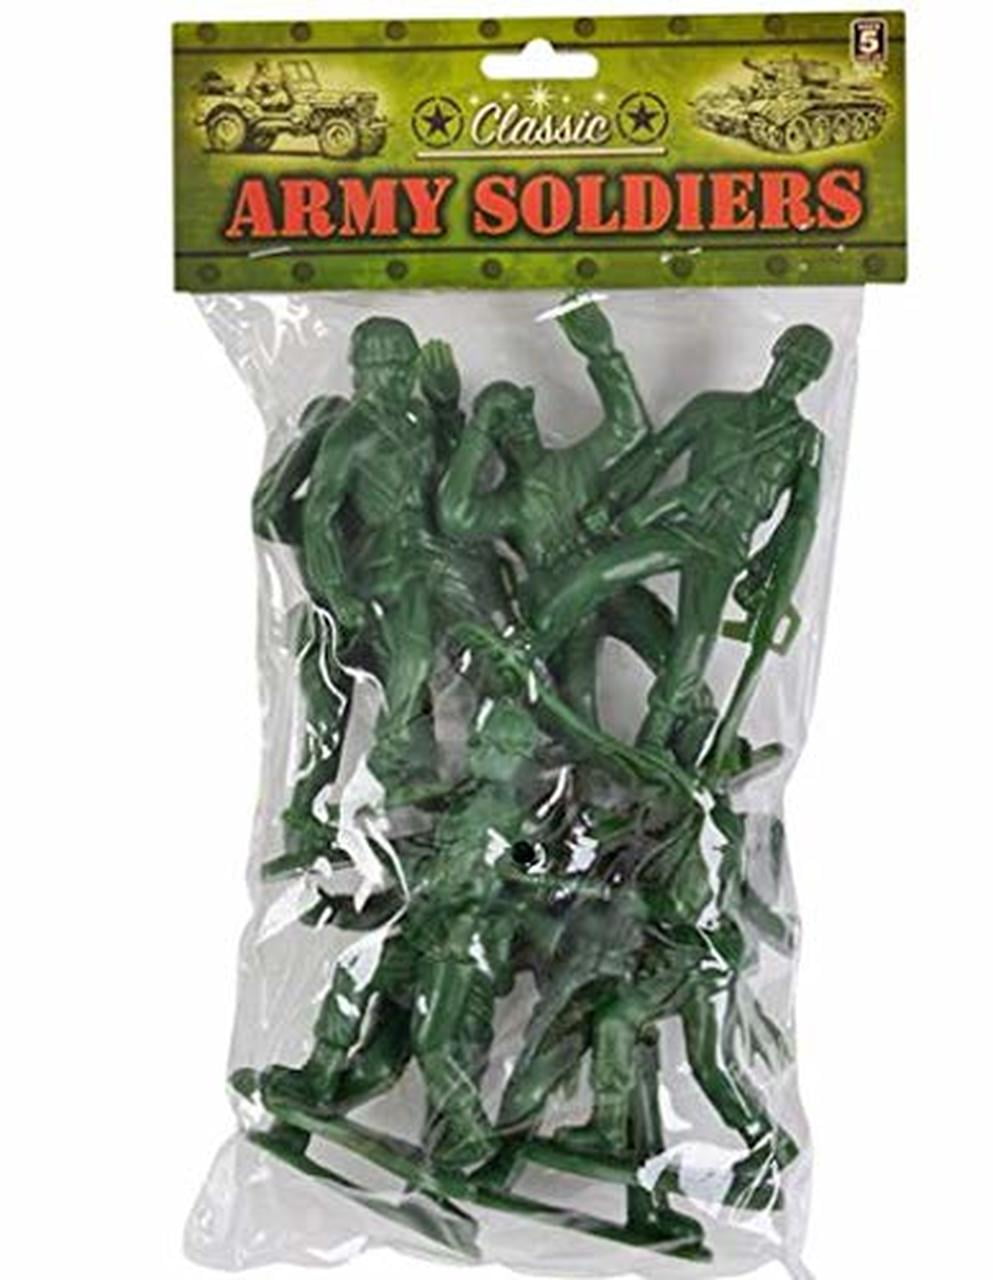 Lot of 9 2" Vintage plastic toy soldiers Bundle Dark Green Army USA 